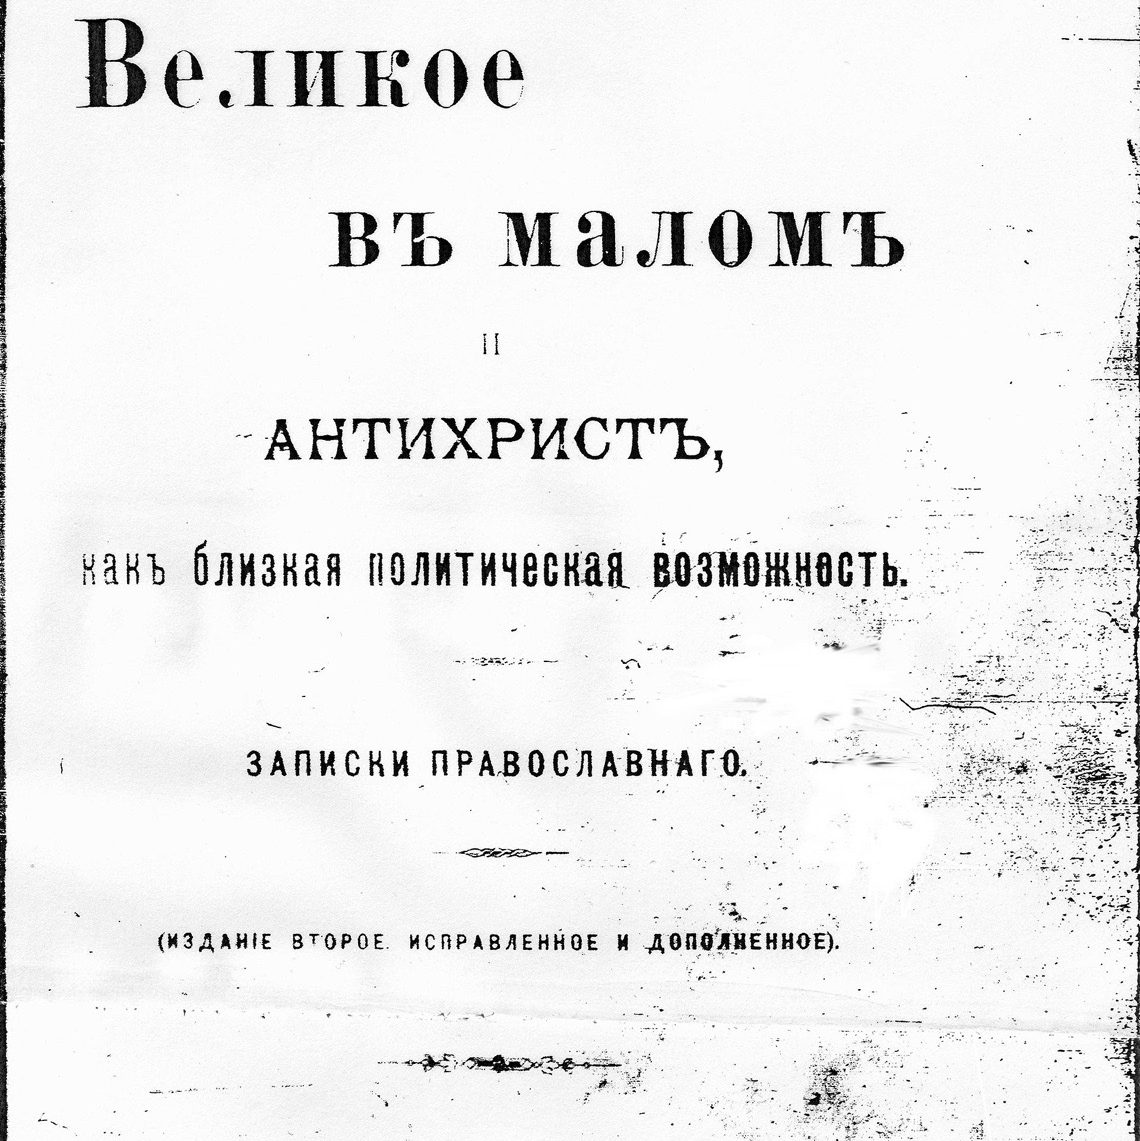 The Protocols of the Learned Elders of Zion, invented by Russian government agents and printed in 1903; English publishing 1919